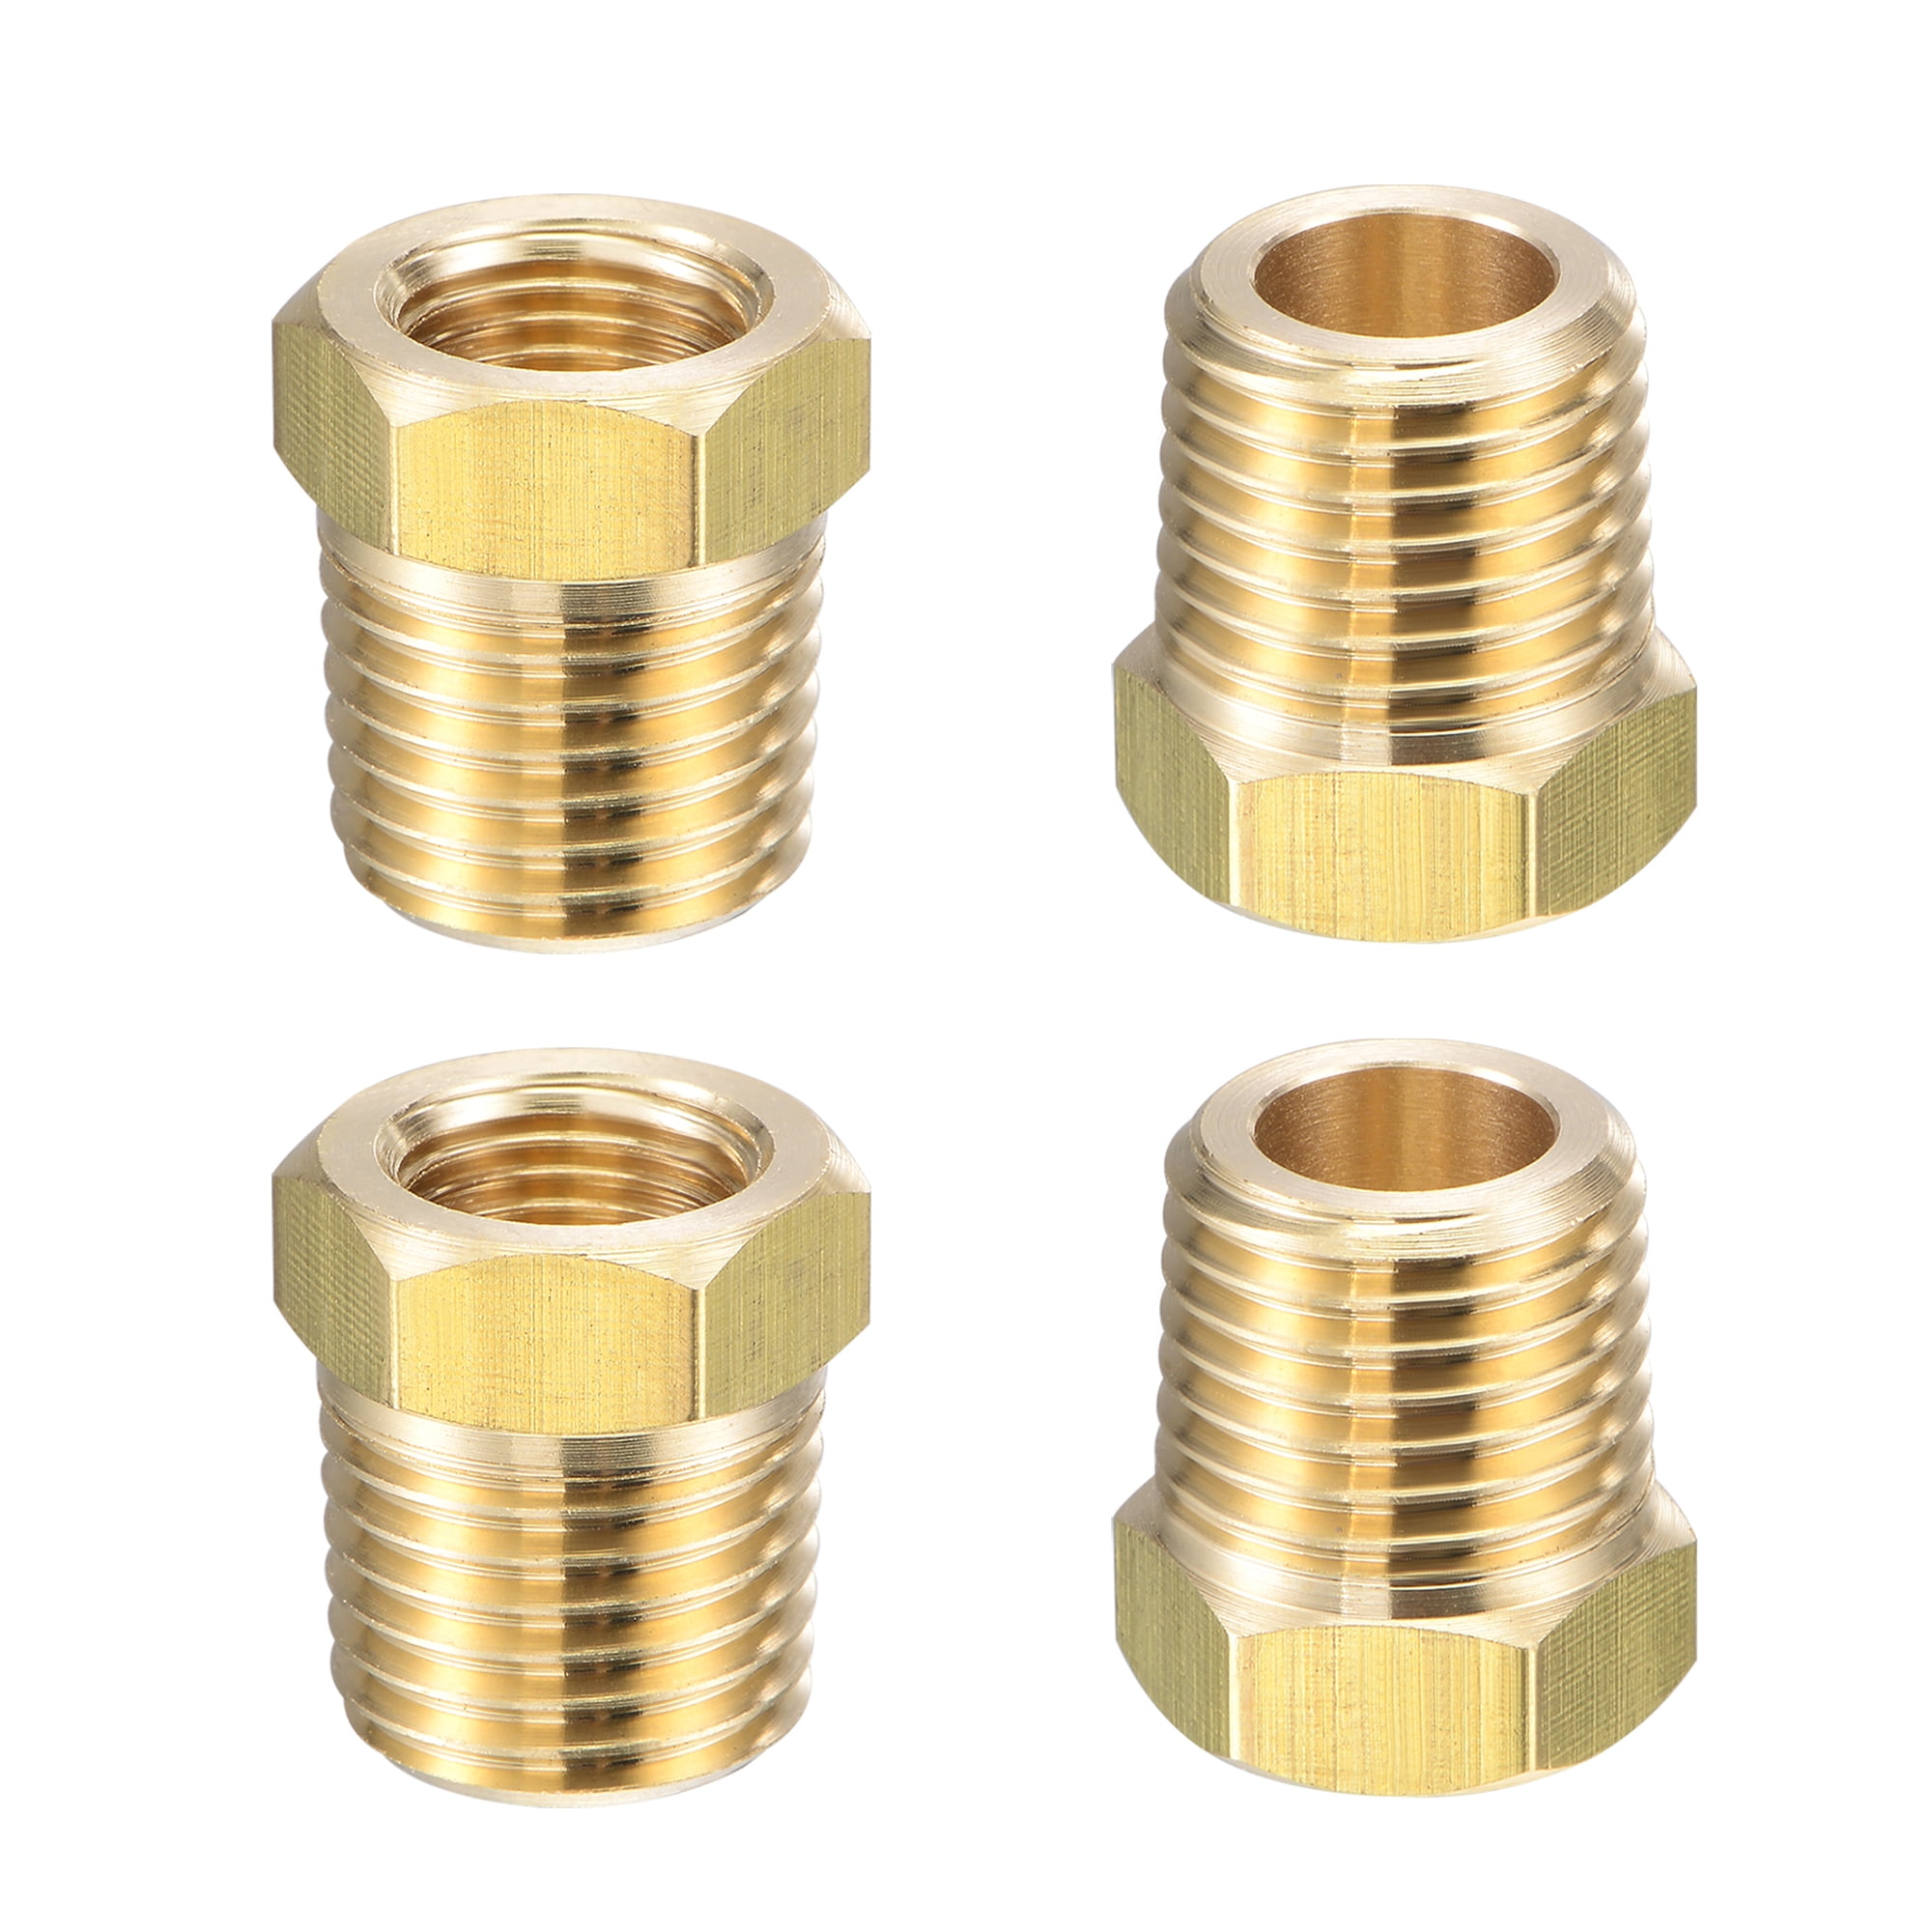 1/4" Male x 1/4" Female Thread Thicken Full Brass Connector Adapter Fitting 